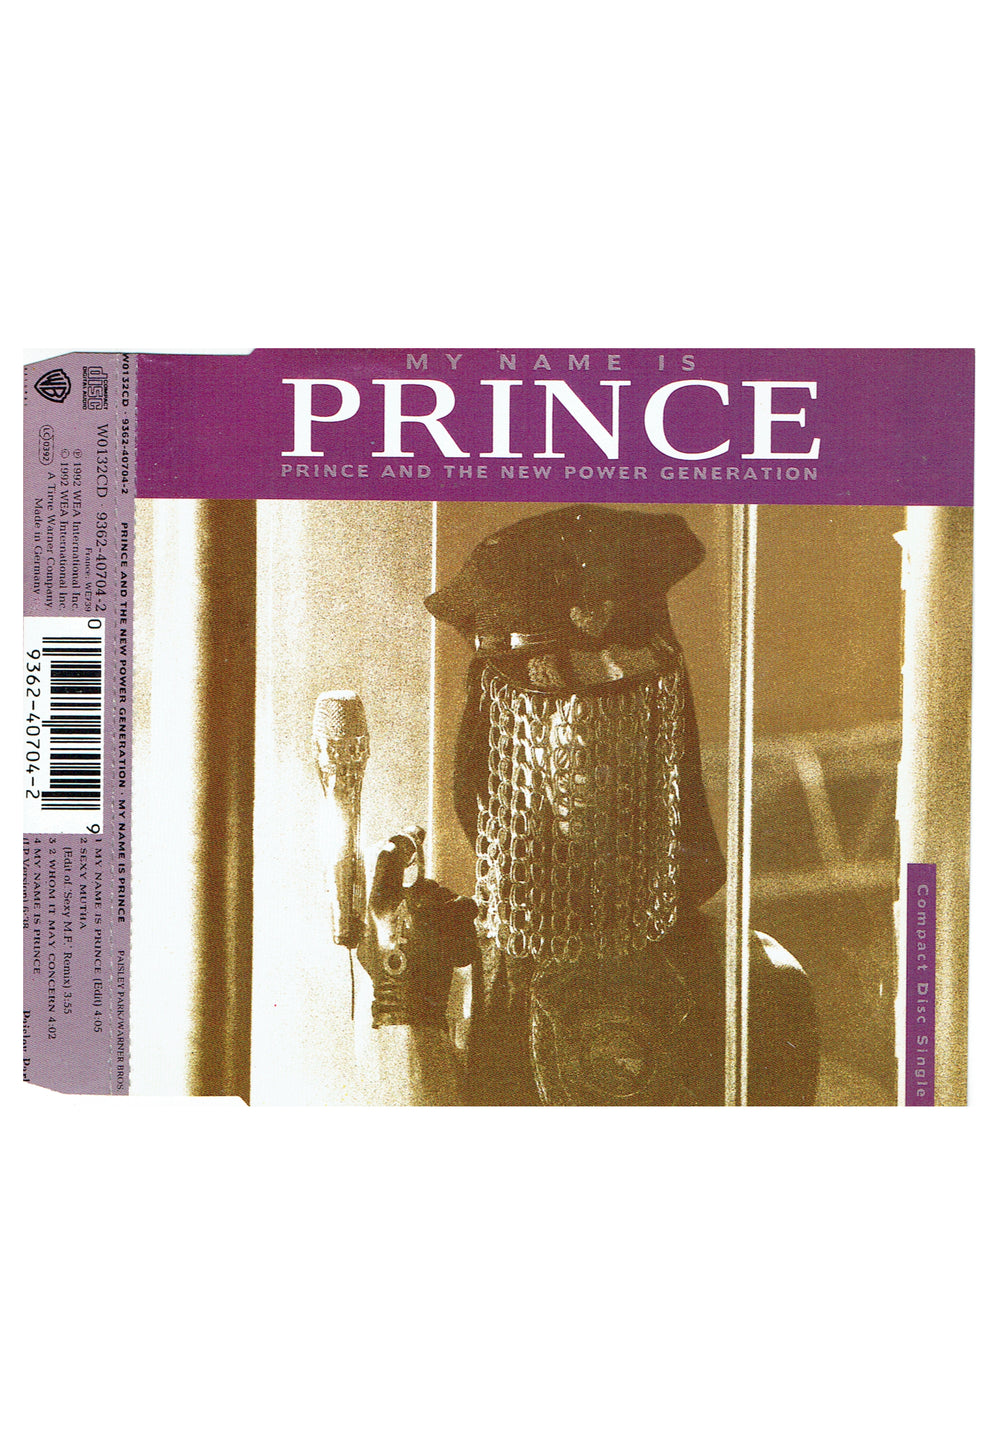 Prince – & The New Power Generation – My Name Is Prince CD Single UK Preloved: 1992